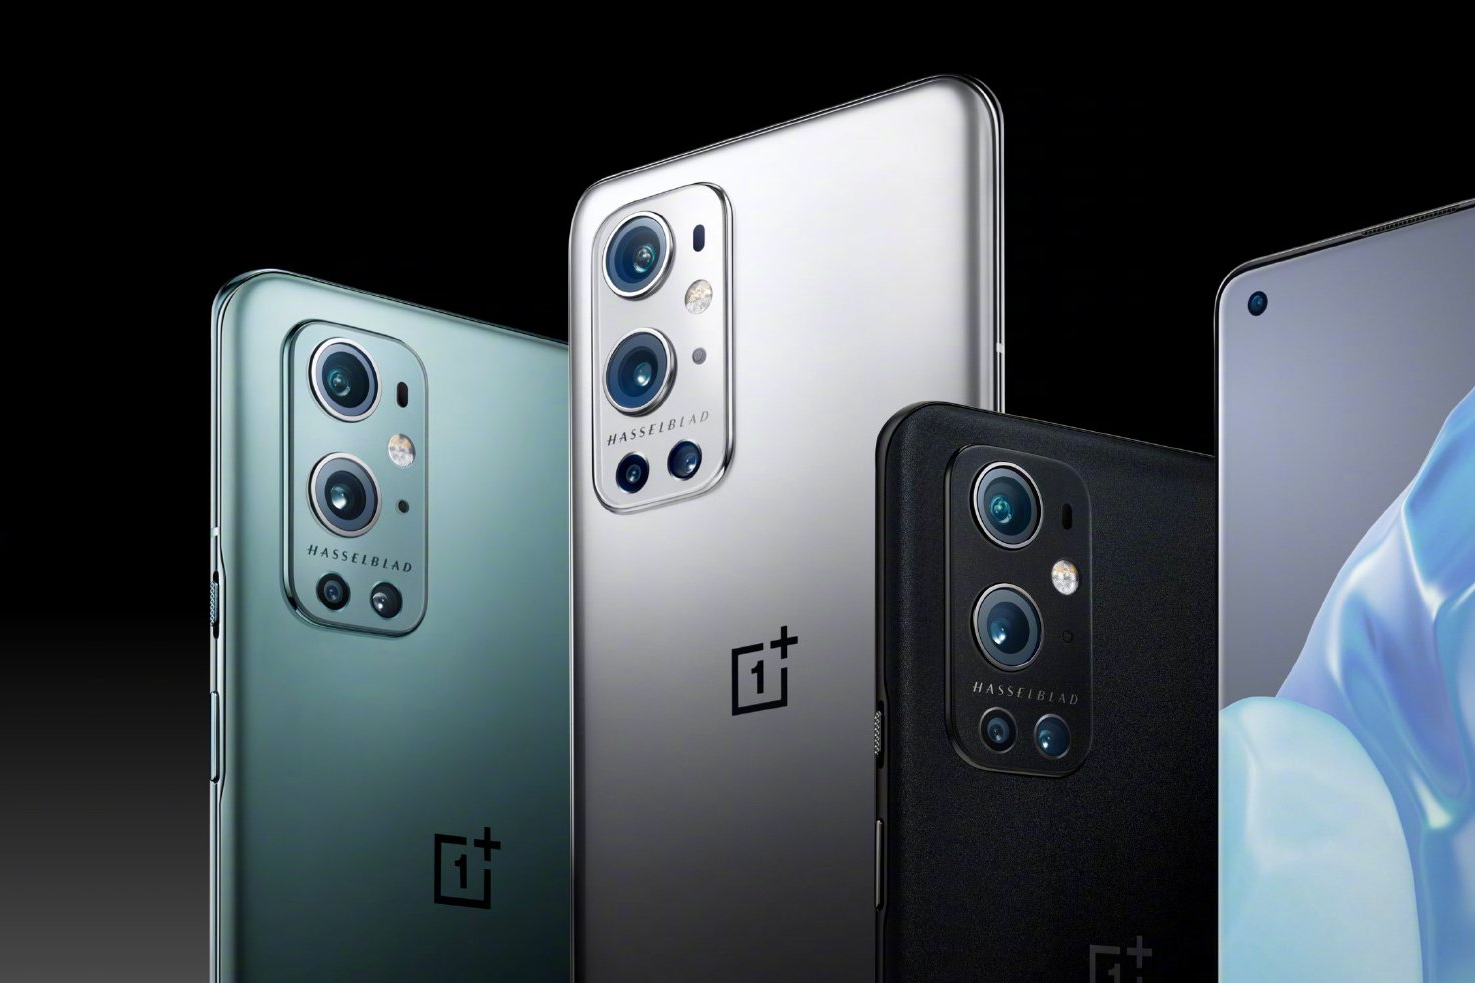 OnePlus CEO confirms we might not get a OnePlus 9 T-series